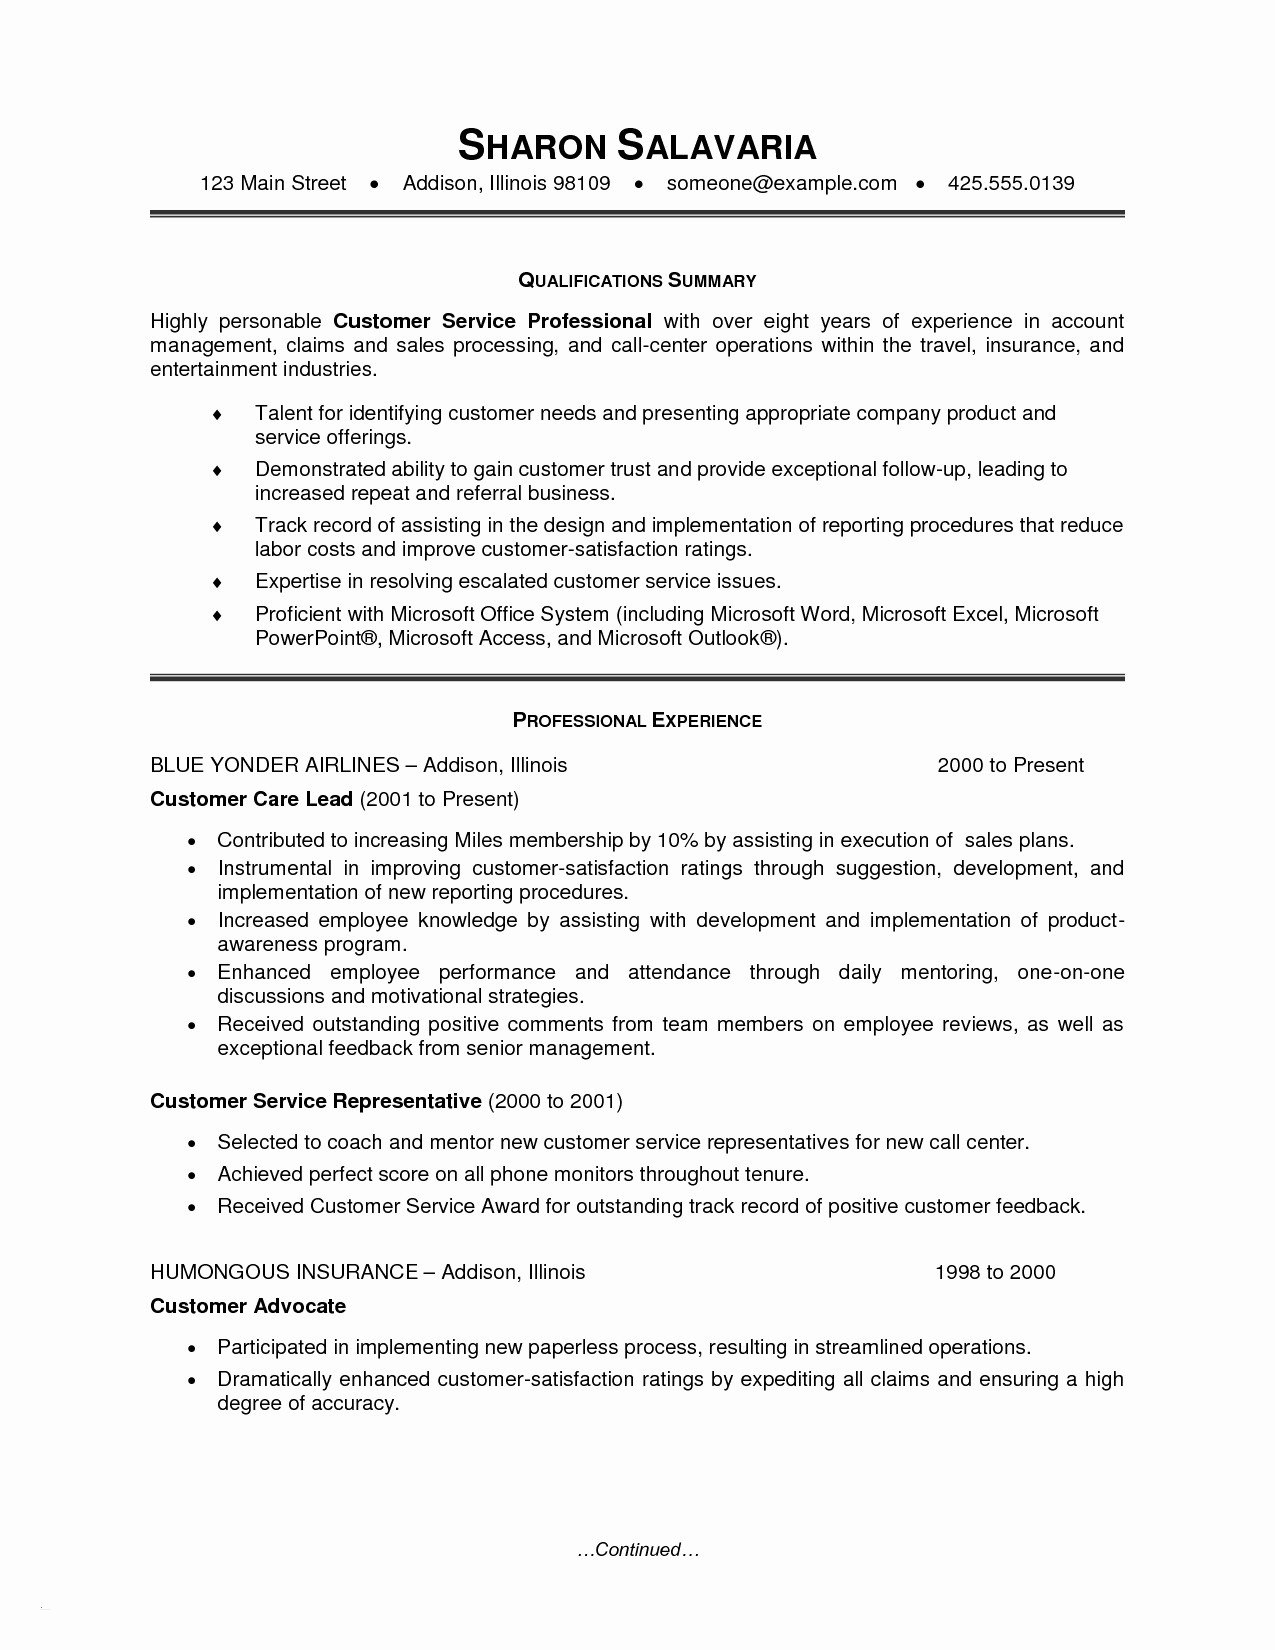 Going Paperless Letter to Customers Template - 21 Free Customer Service Resume Bcbostonians1986